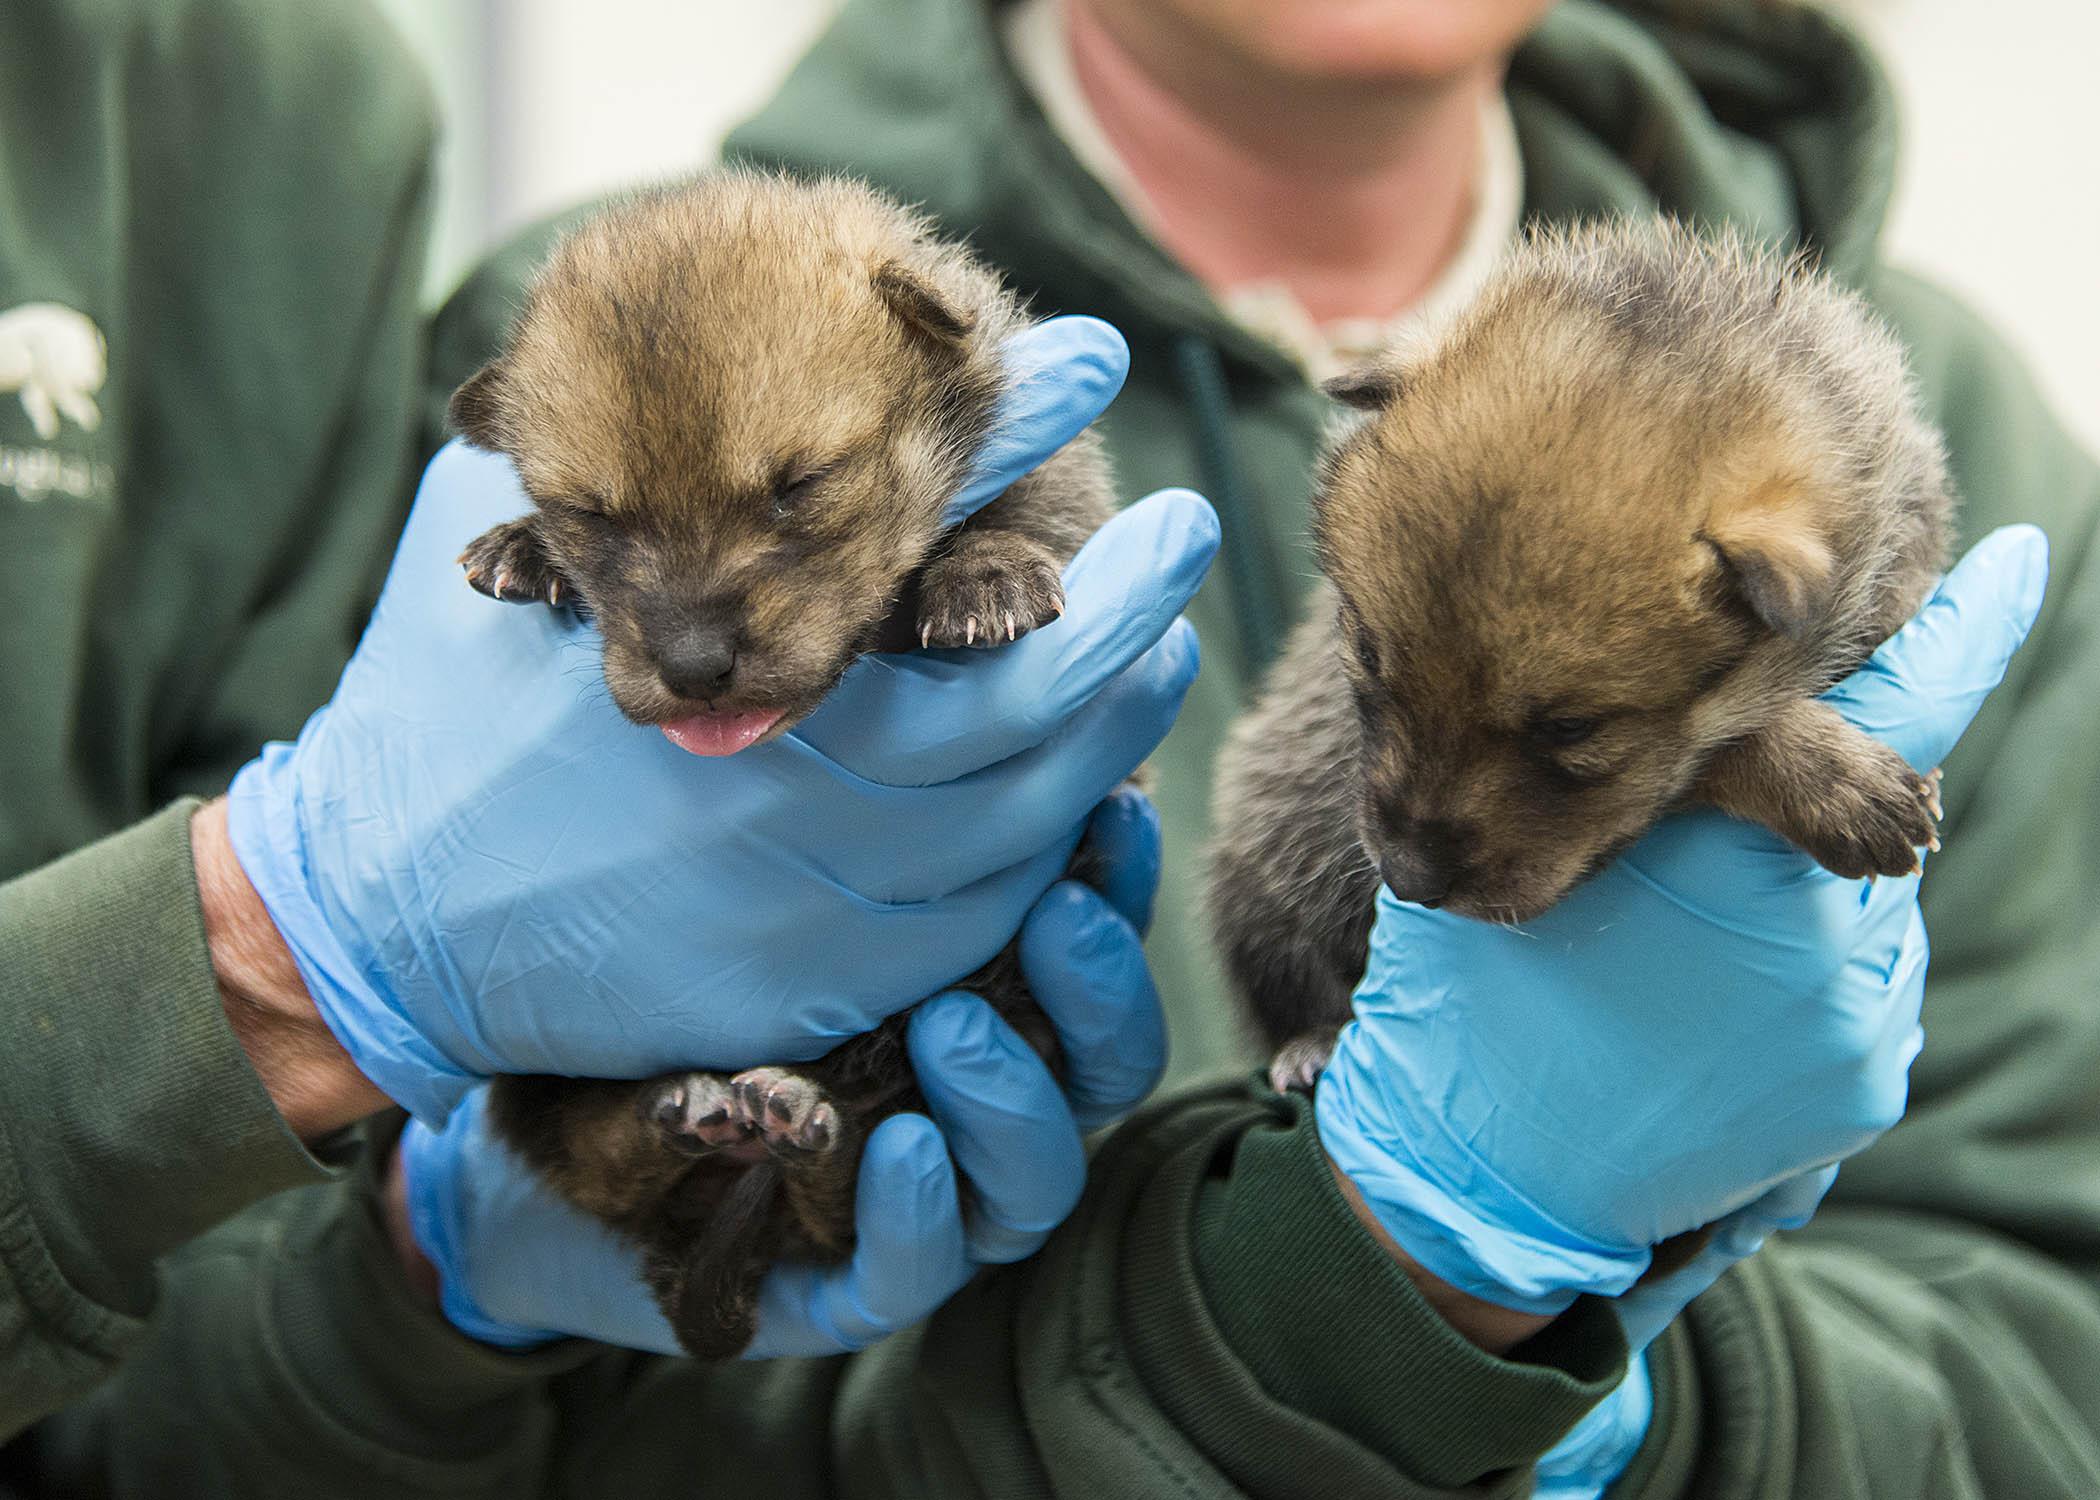 Two wild-born Mexican gray wolf puppies arrived at Brookfield Zoo in May as part of the U.S. Fish & Wildlife Service's recovery program for the species. (Mexican Wolf Interagency Field Team / Chicago Zoological Society)